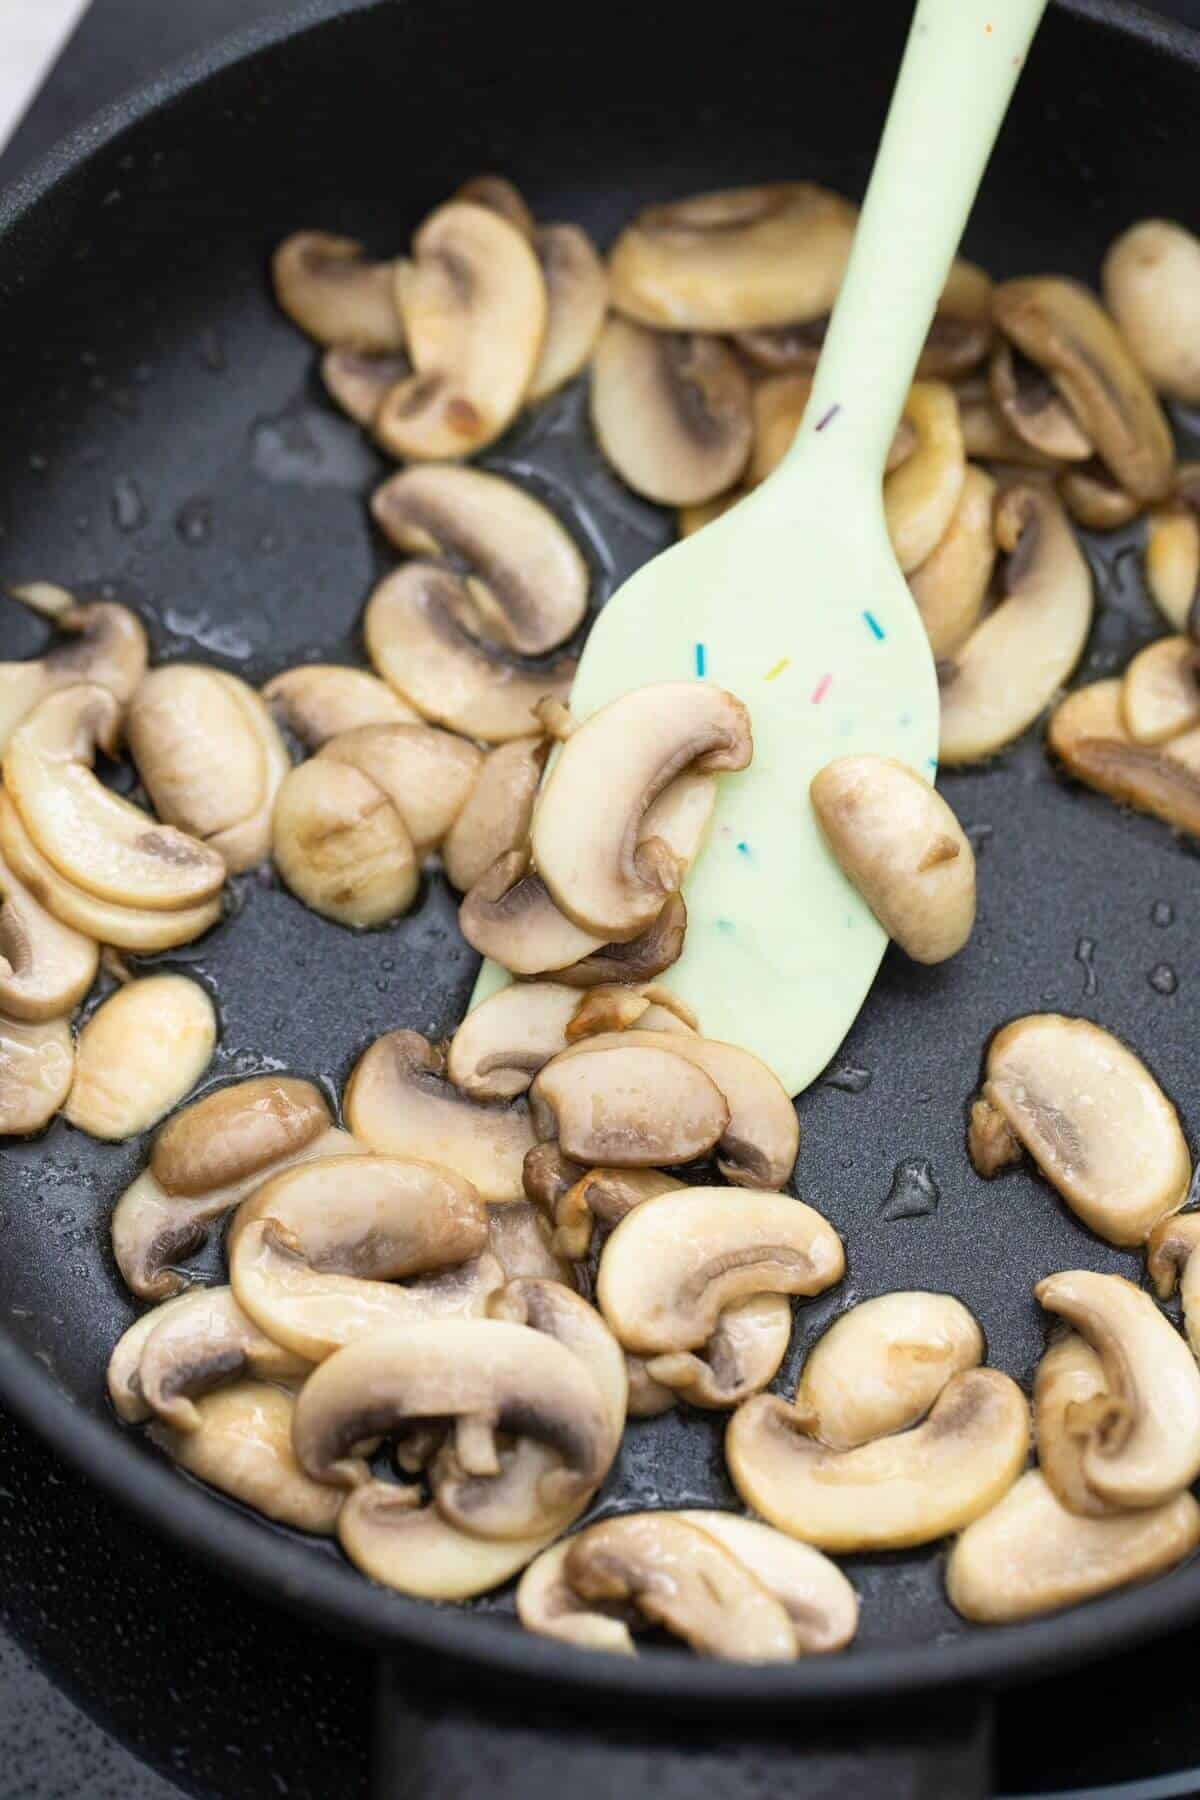 Mushrooms in a frying pan with a green spatula.